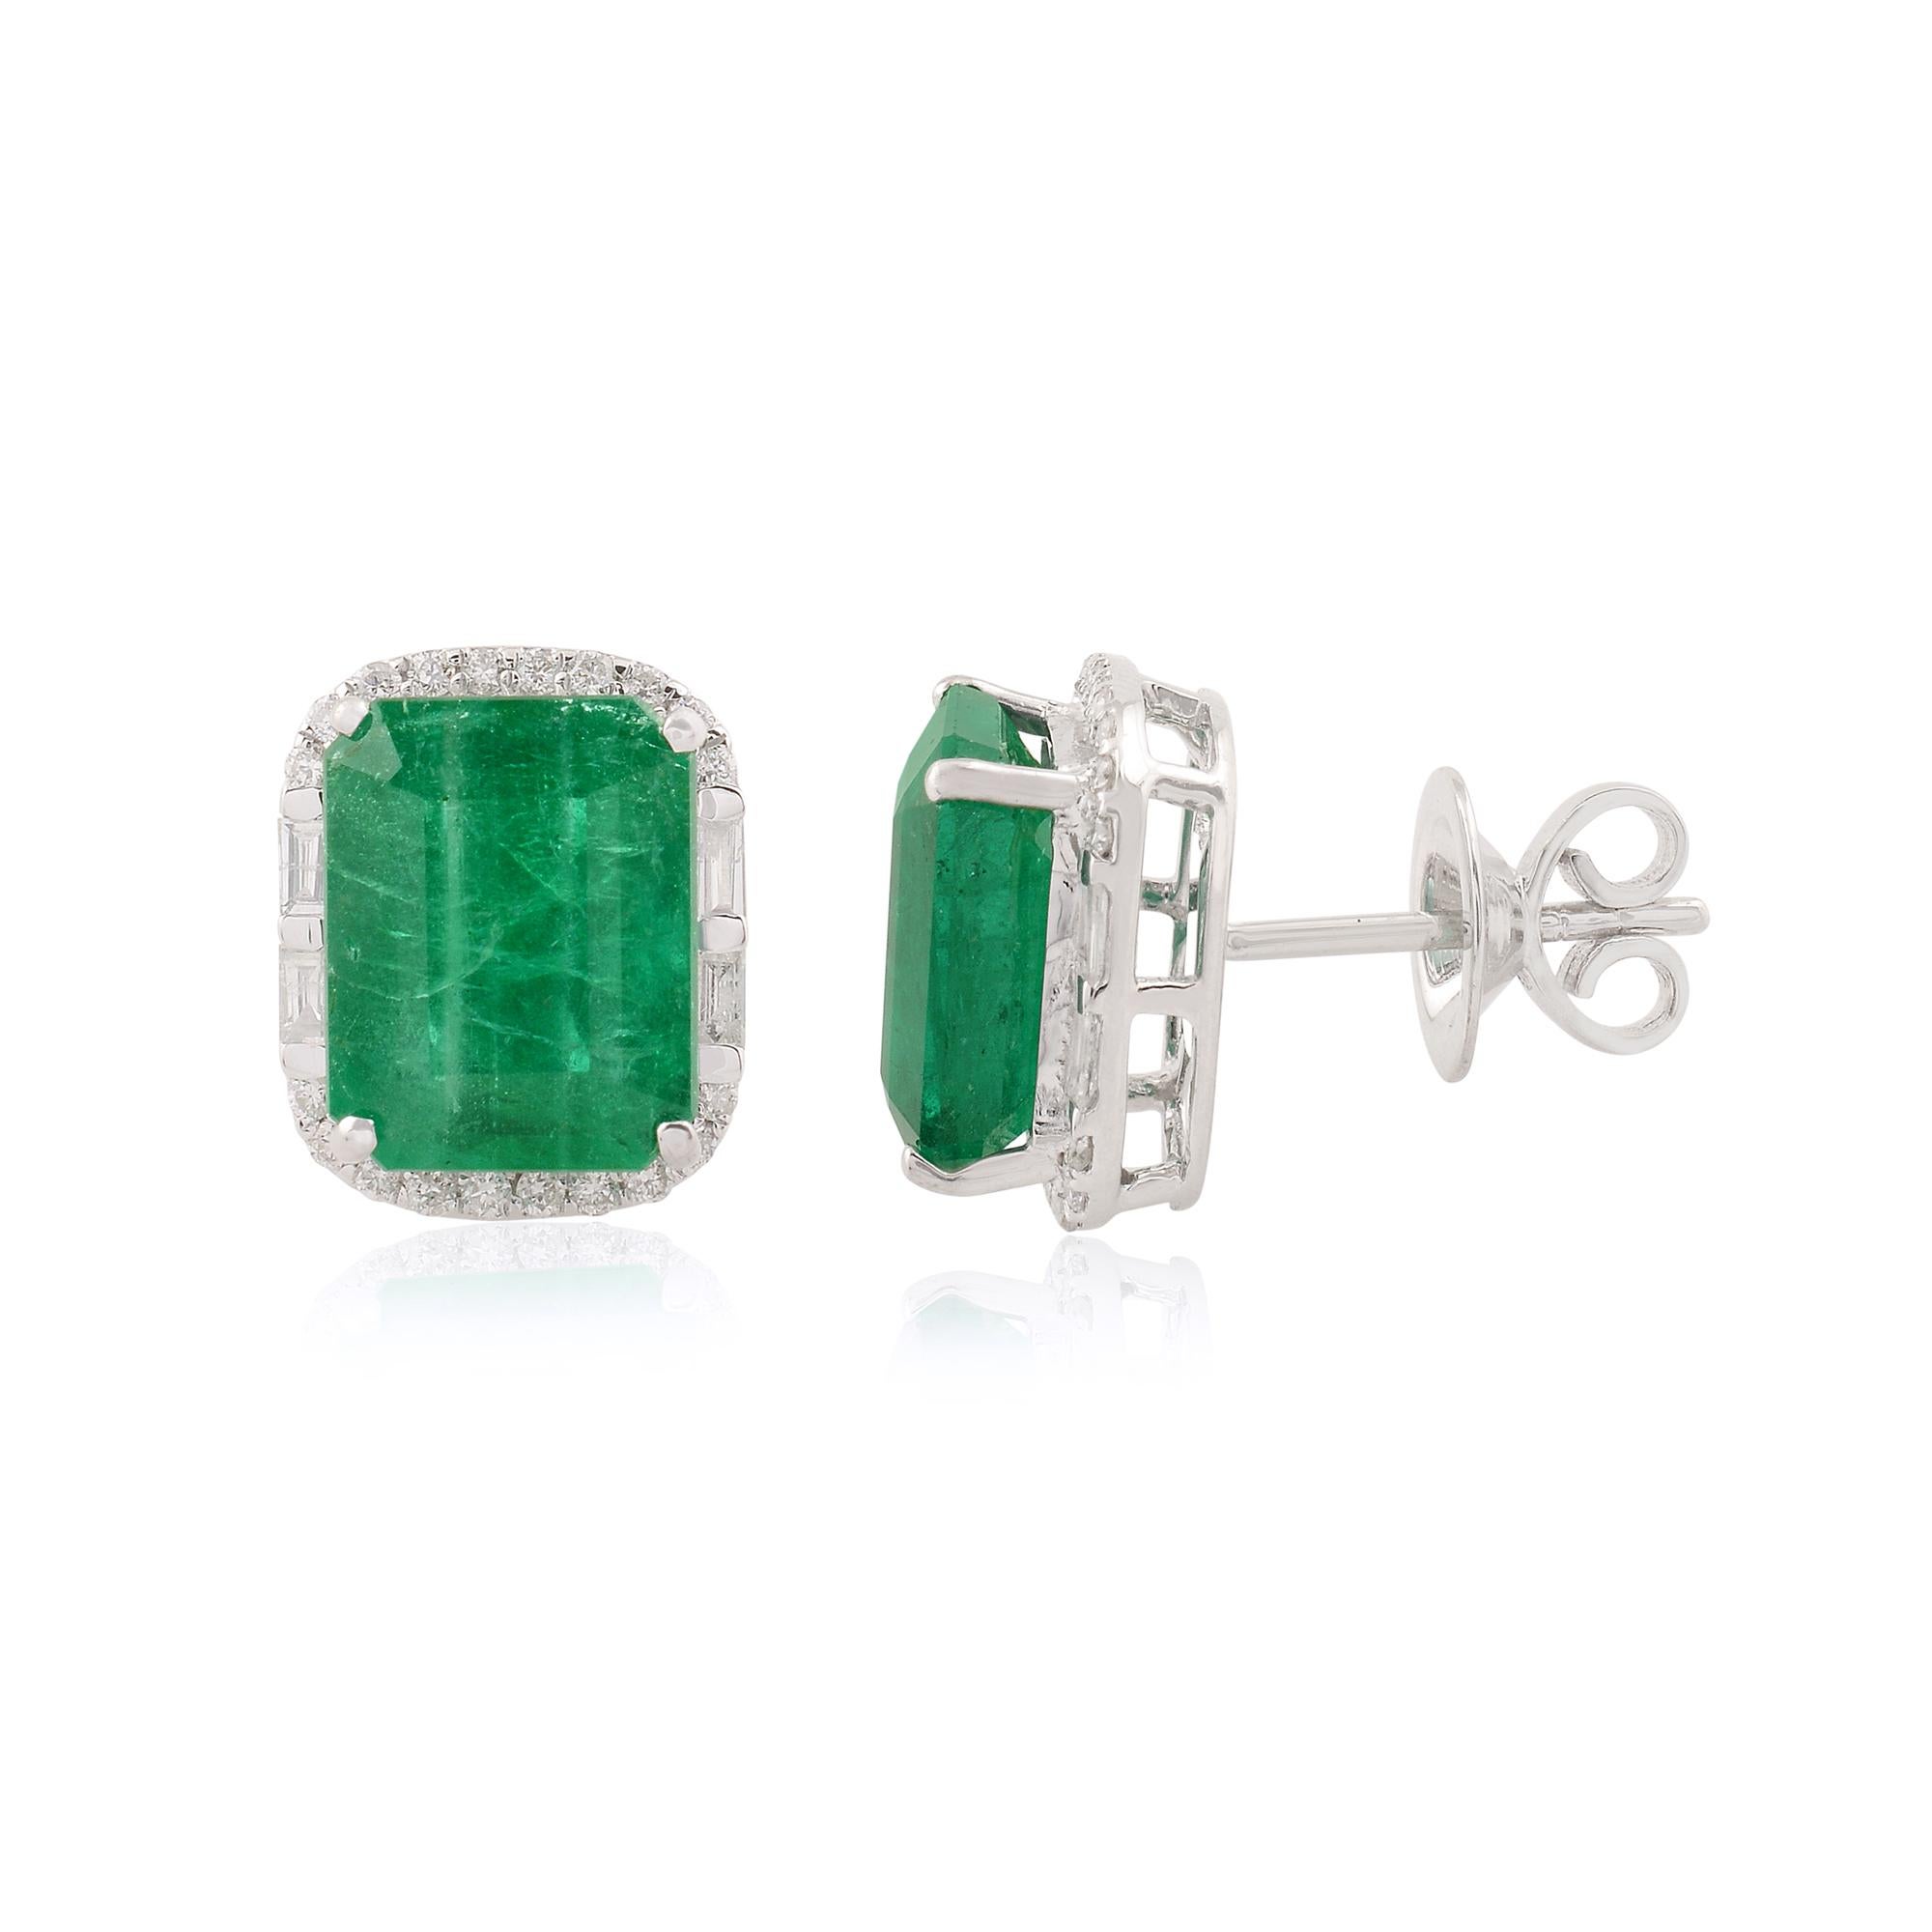 Item Code:- SEE-1076
Gross Wt :- 4.97 gm
18k Solid White Gold Wt :- 3.77 gm
Natural Diamond Wt :- 0.4 ct. ( AVERAGE DIAMOND CLARITY SI1-SI2 & COLOR H-I )
Zambian Emerald Wt :- 5.62 ct.
Earrings Size :- 12/10 mm Approx

✦